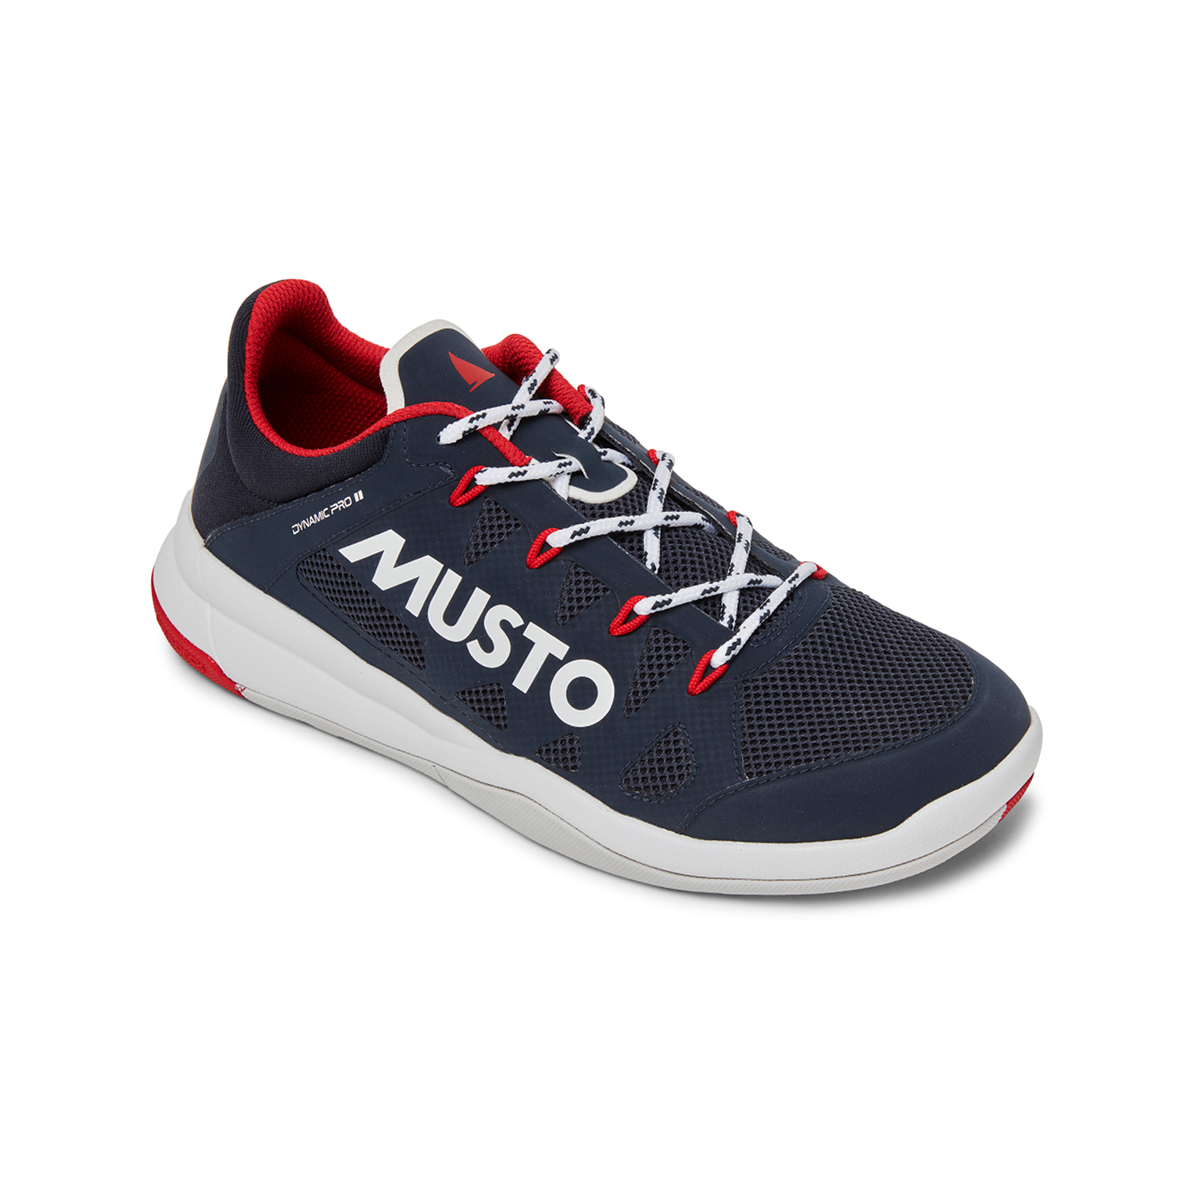 Musto Dynamic Pro II Adapt chaussures bateau homme bleu marine, taille 44,5 (US 10,5)